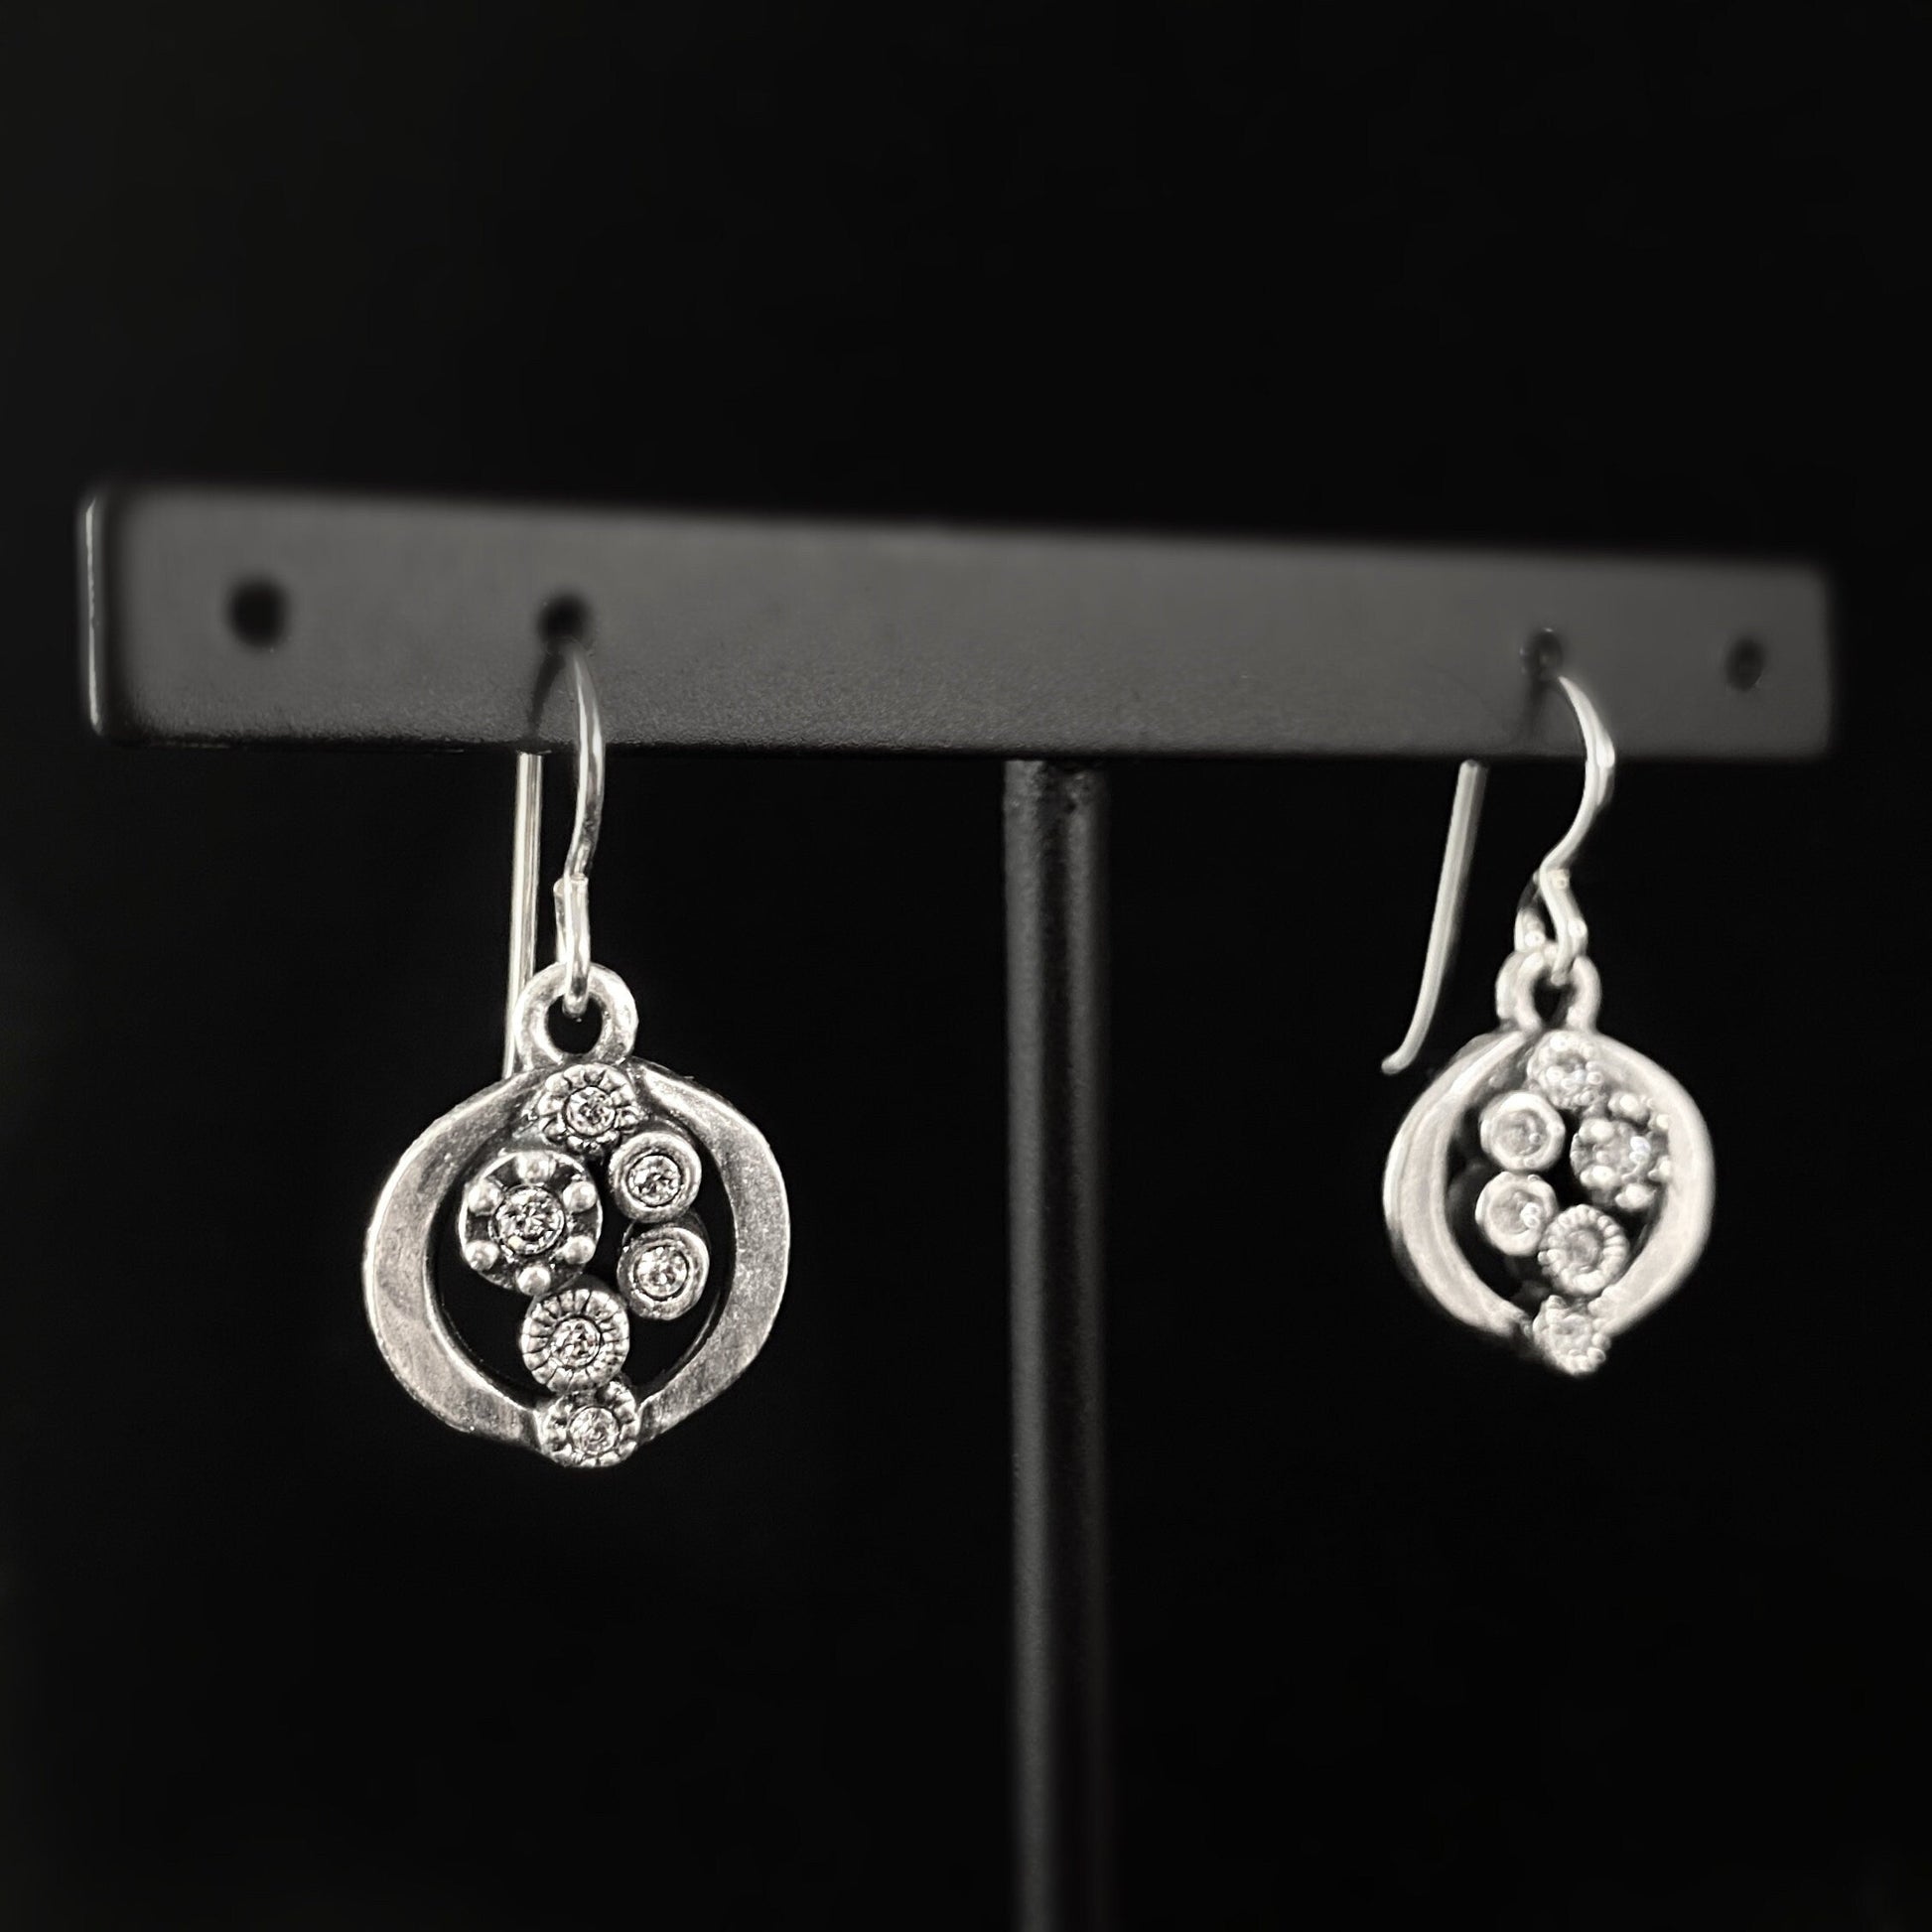 Handmade Silver Circle Earrings with Crystals - Lily Pad